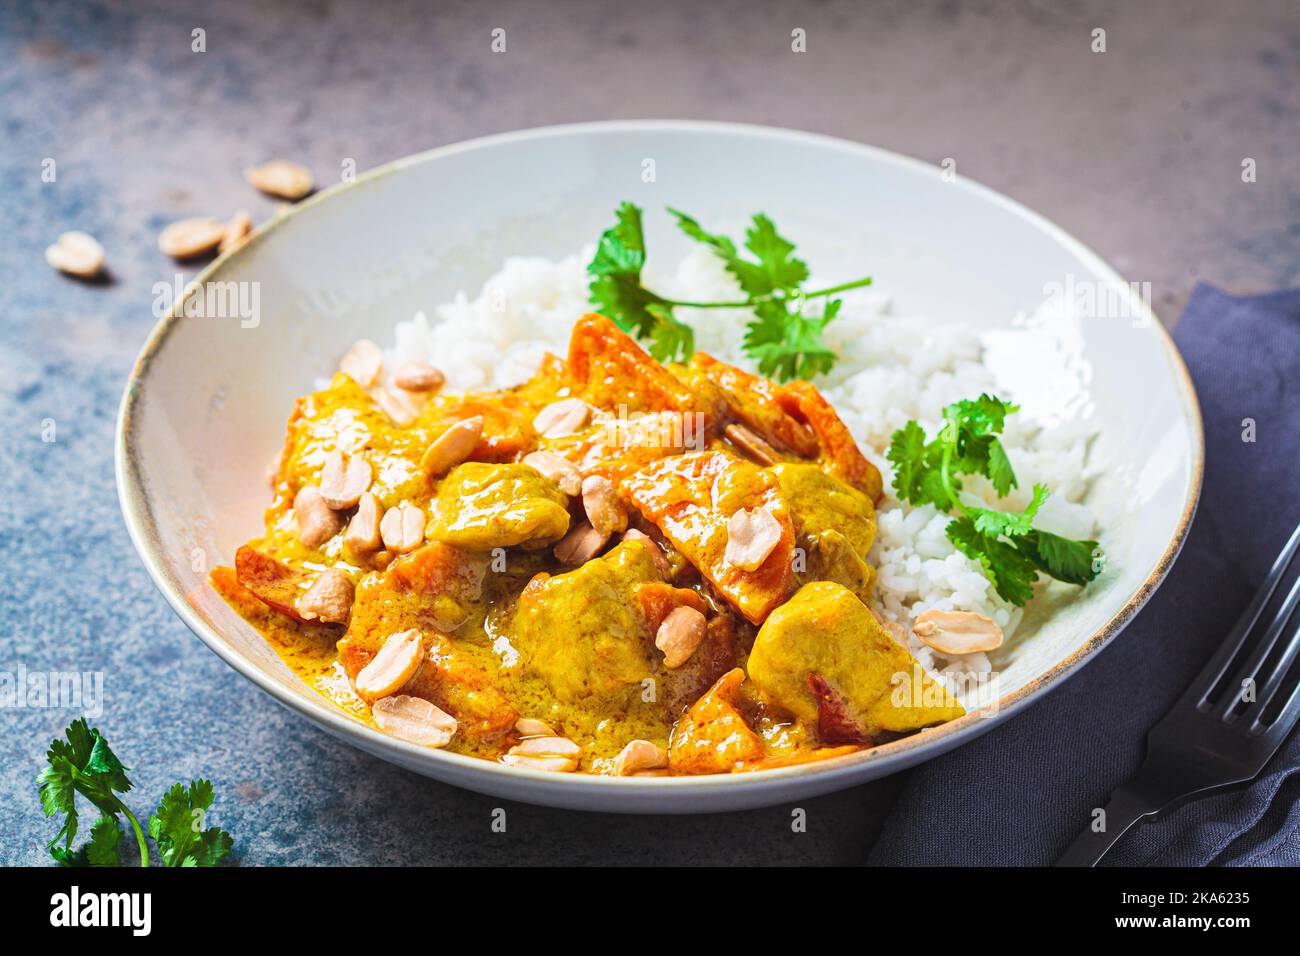 Thai chicken and peanut curry with rice in gray bowl, dark background. Asian cuisine concept. Stock Photo